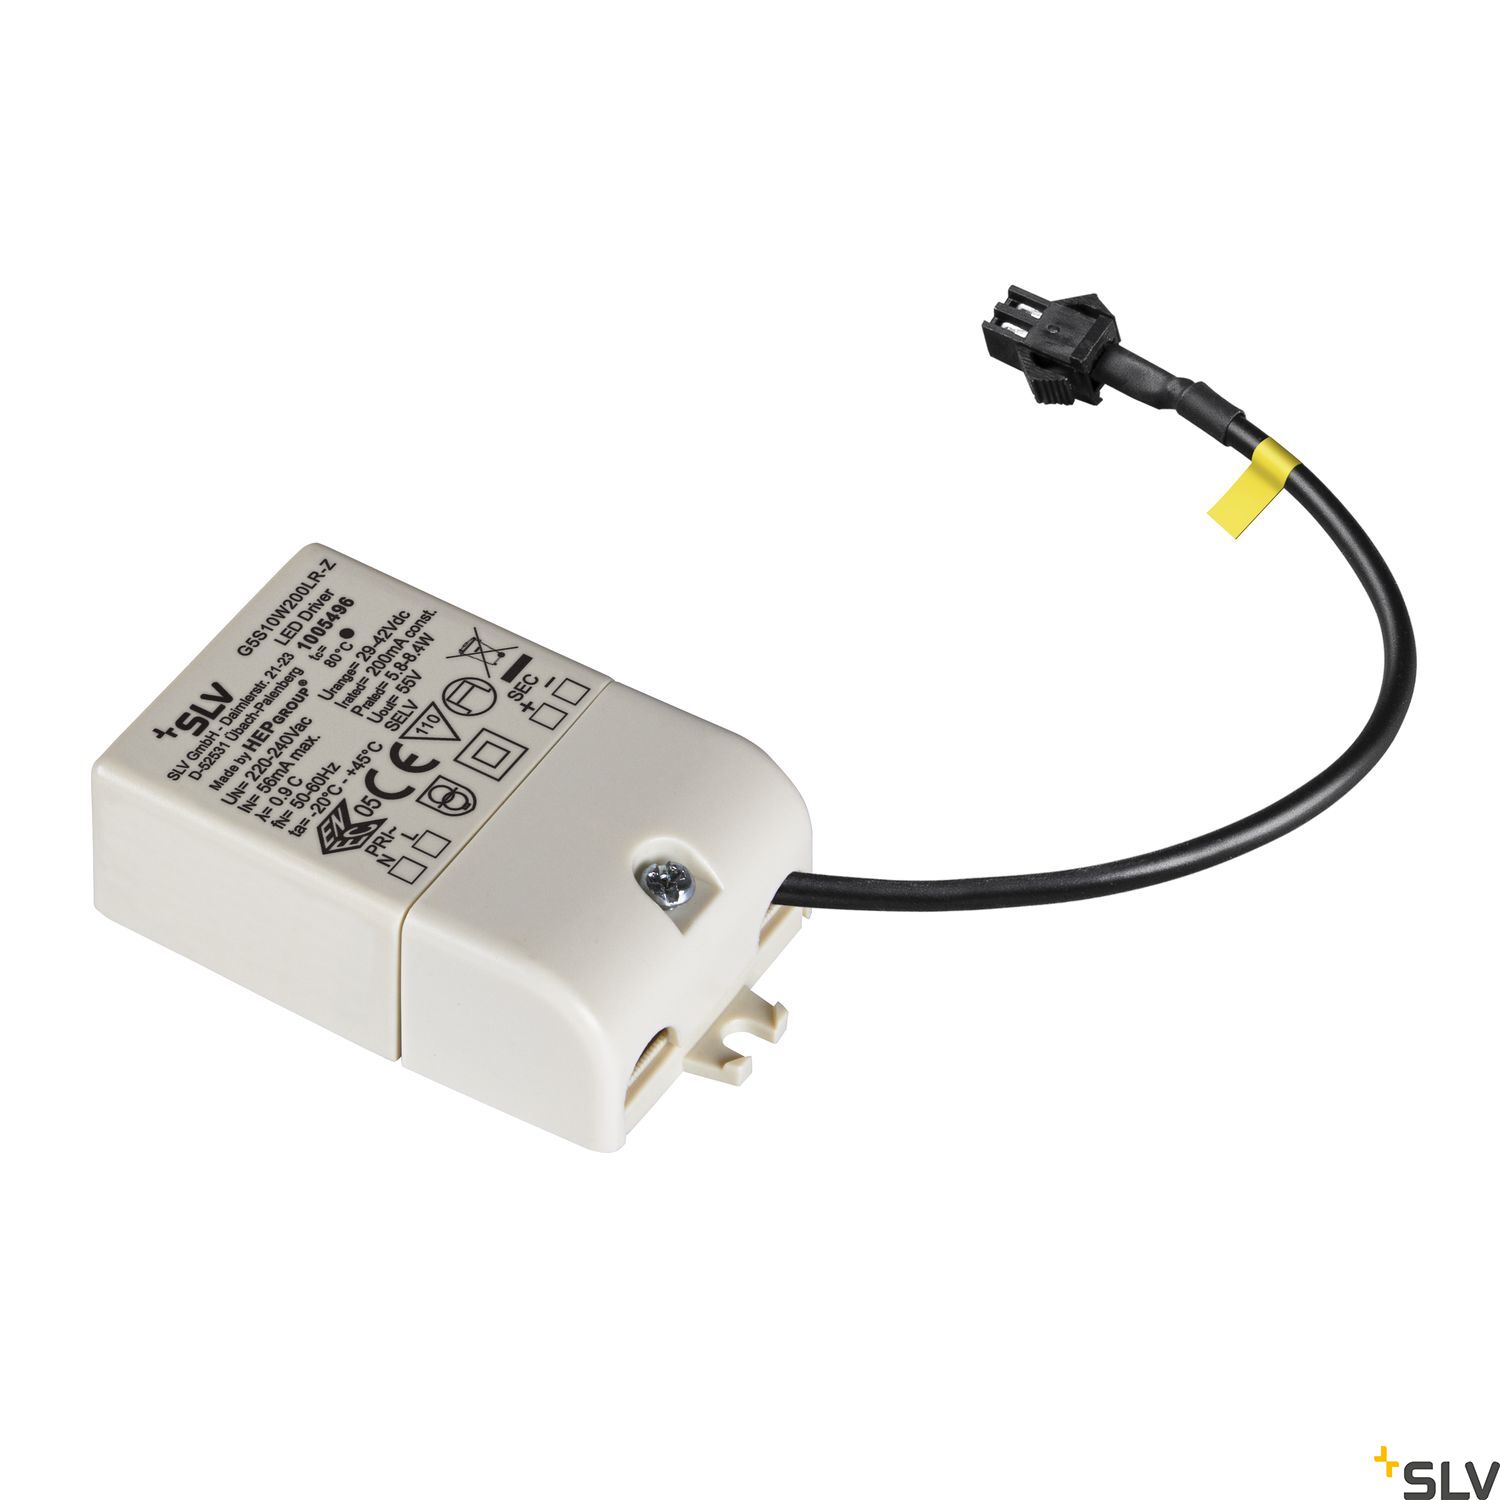 SLV Sterownik LED 200 mA 10 W Quick Connector 1005610